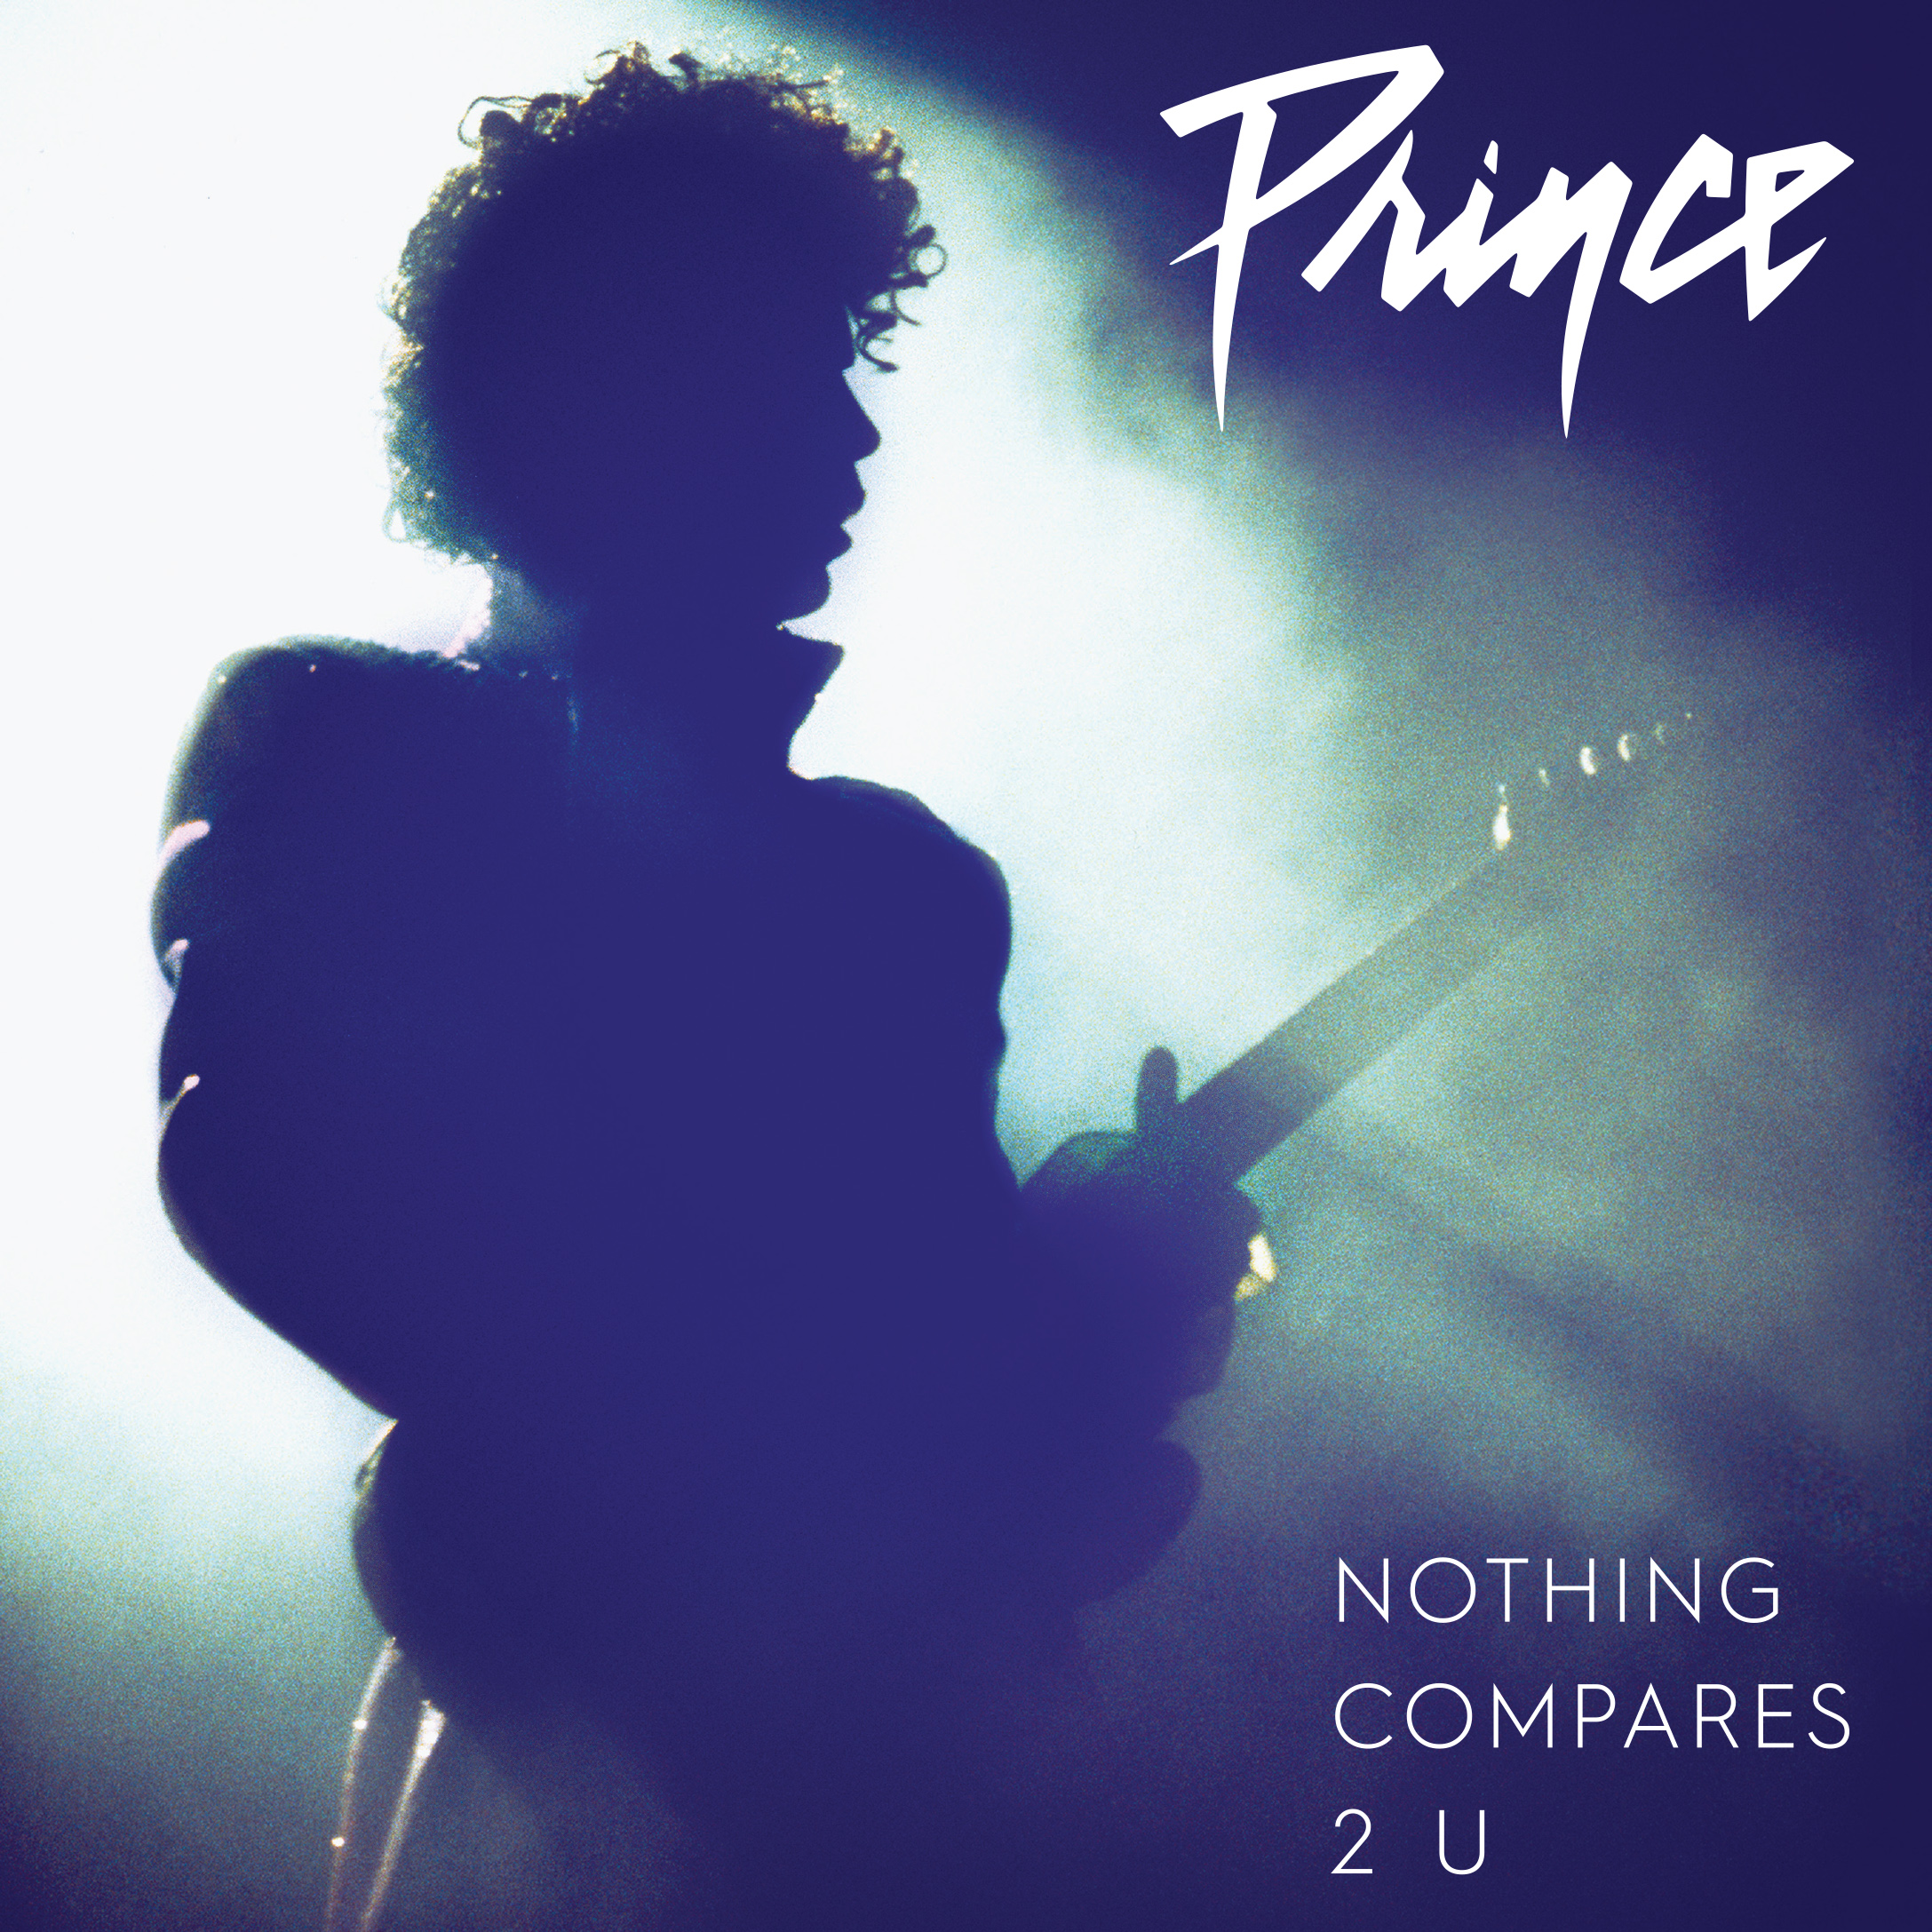 Песня nothing compares. Nothing compares 2 u Prince. Prince LP. The Family - "nothing compares 2 u",. Jimmy Scott nothing compares 2 u.